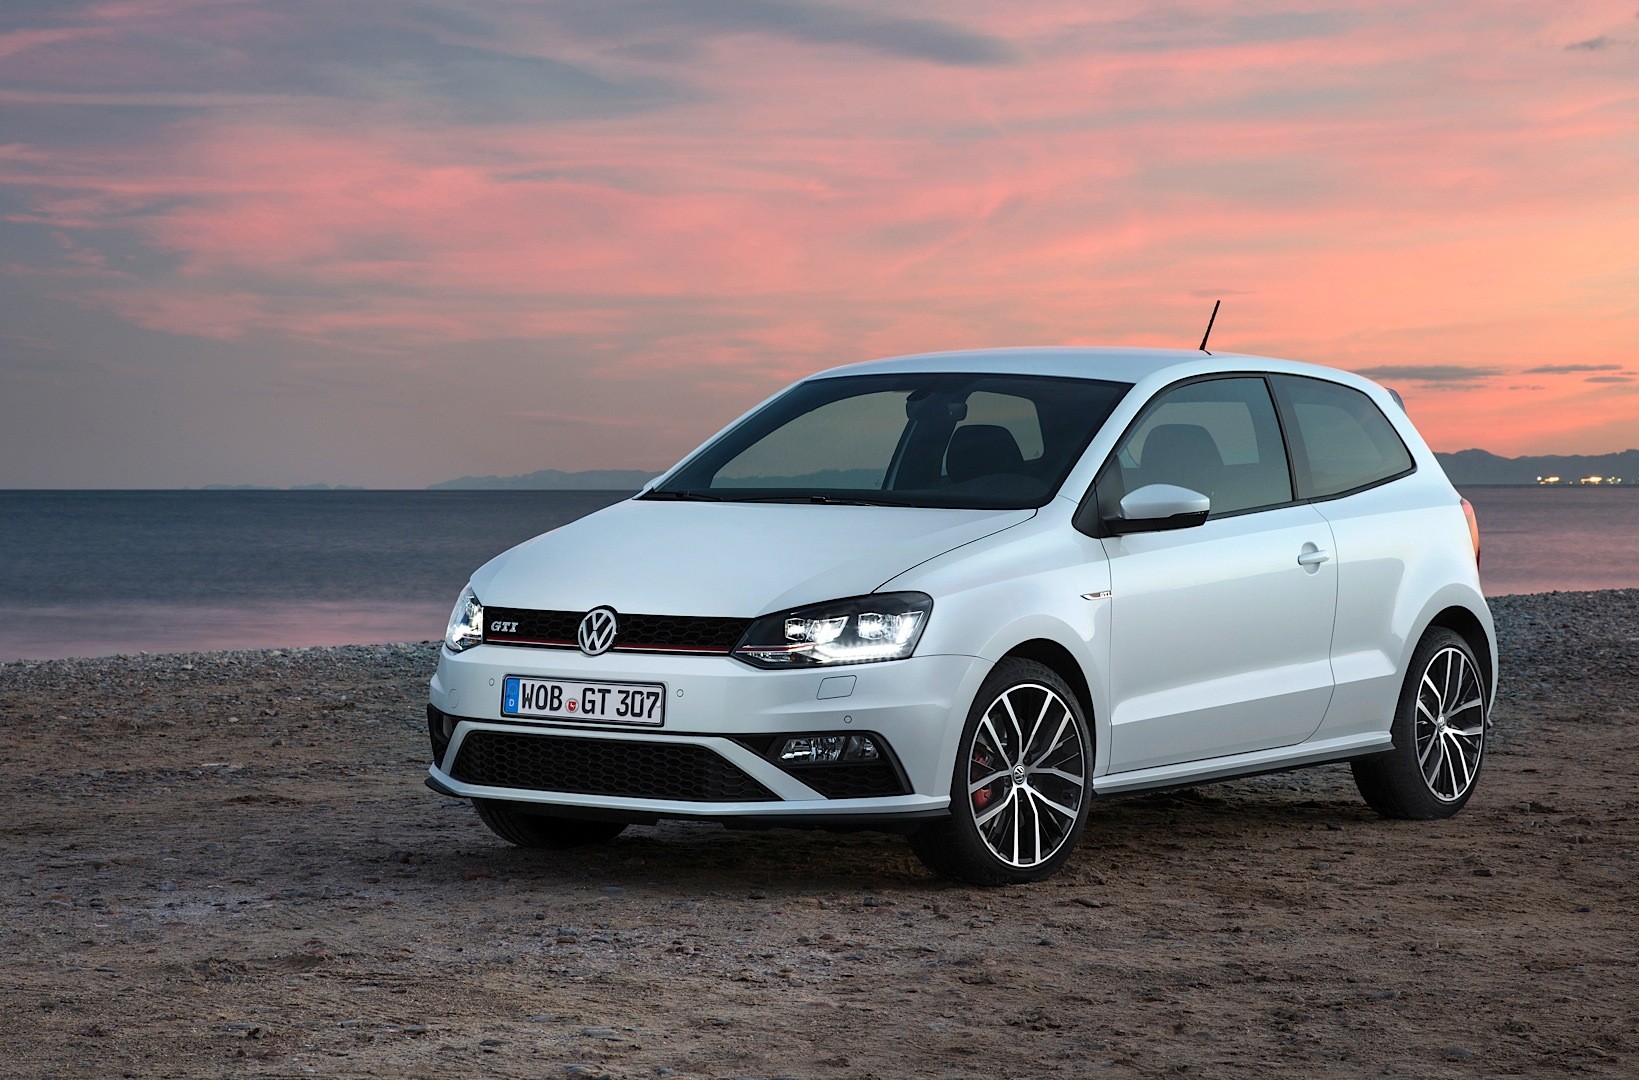 2015 Volkswagen Polo GTI (6R Facelift) New Photos and